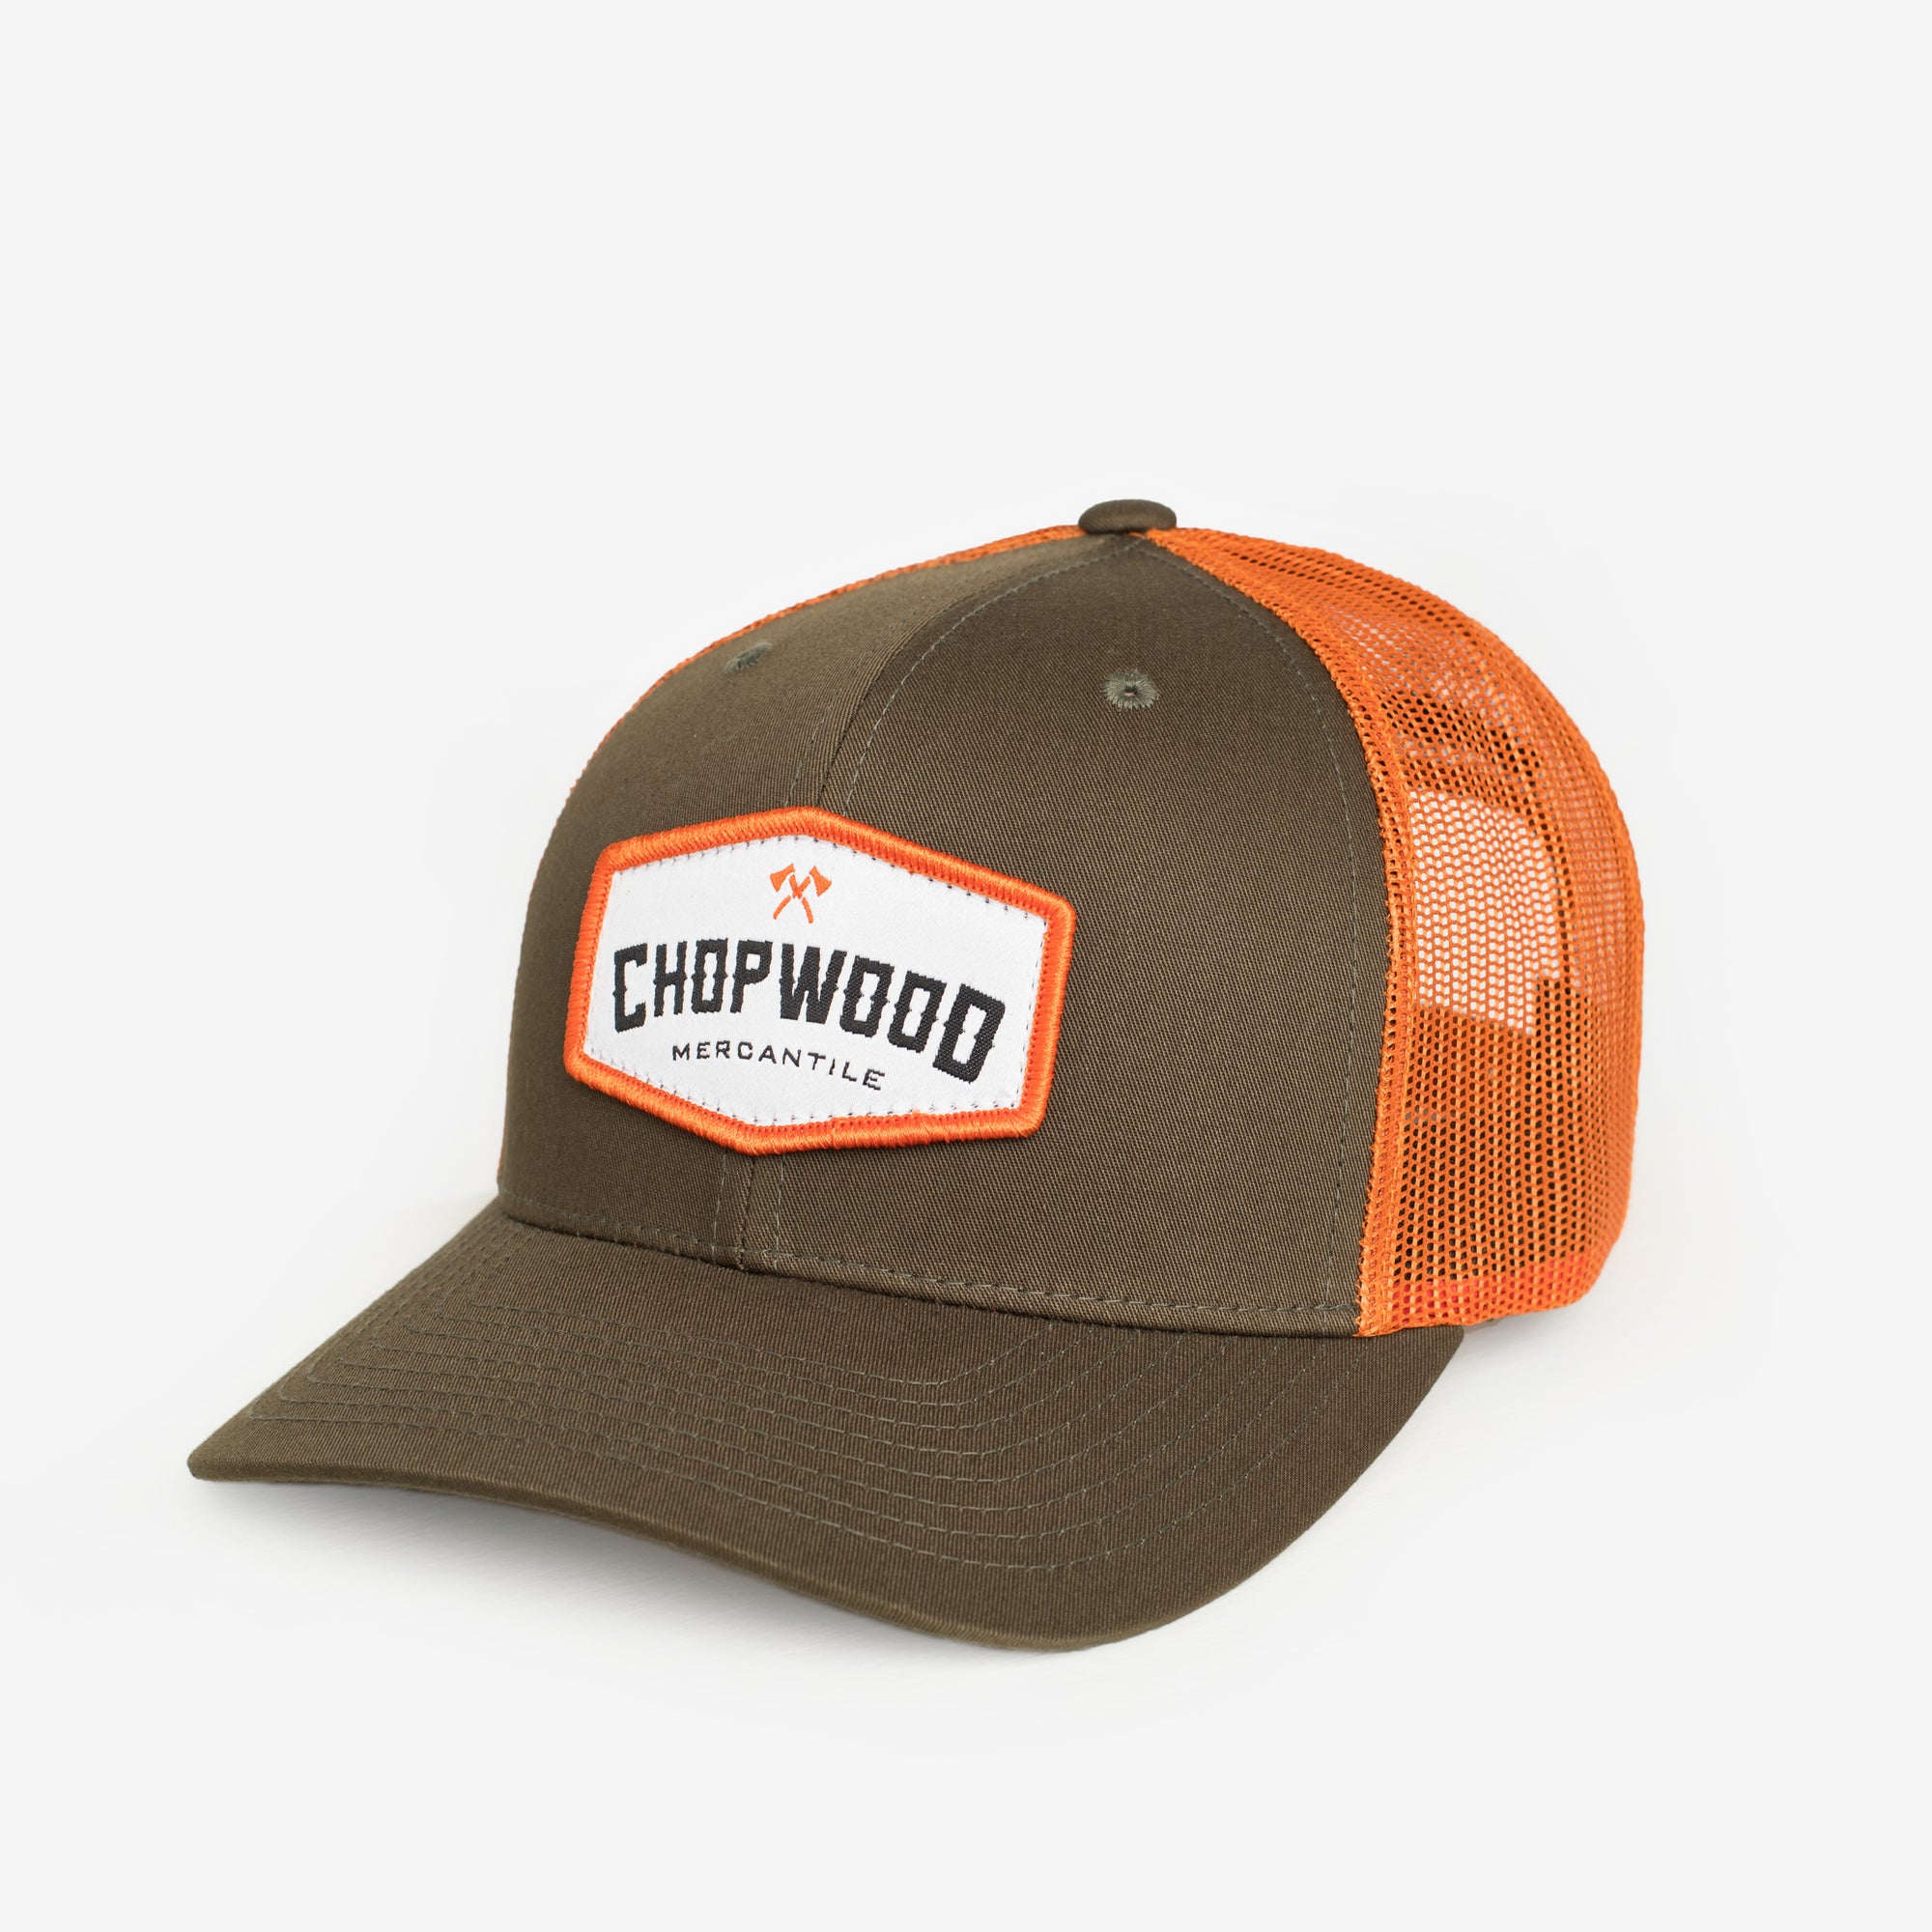 CW Hat 6 Panel Large Patch Mesh